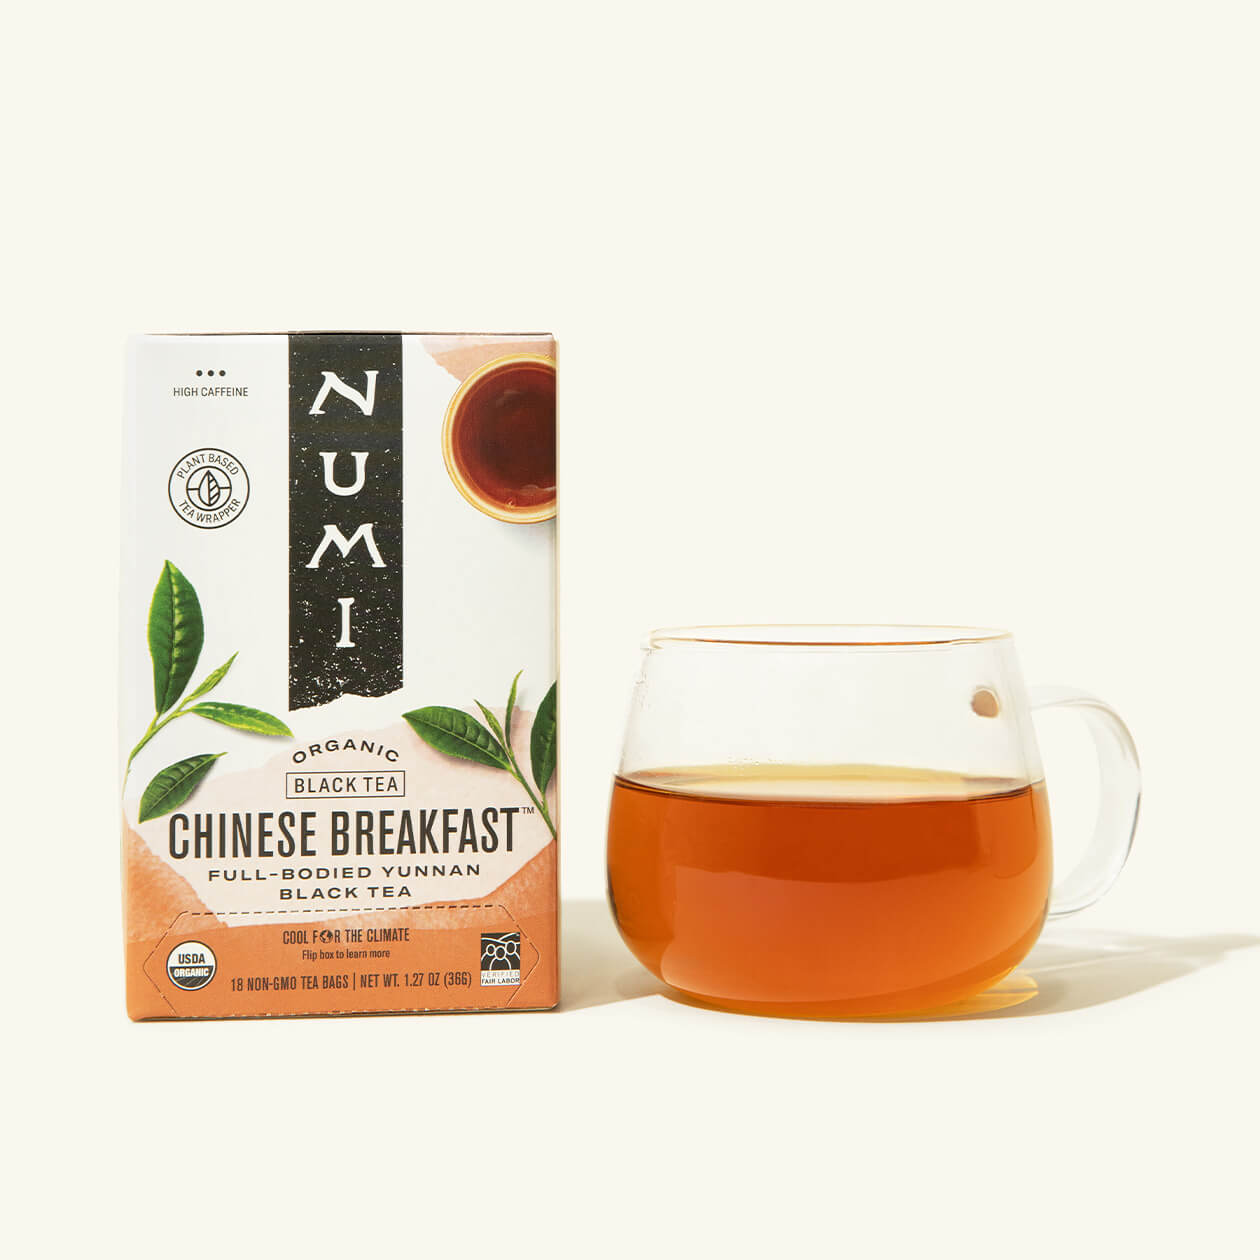 A box of Numi's Chinese Breakfast next to a brewed cup of tea in a clear cup